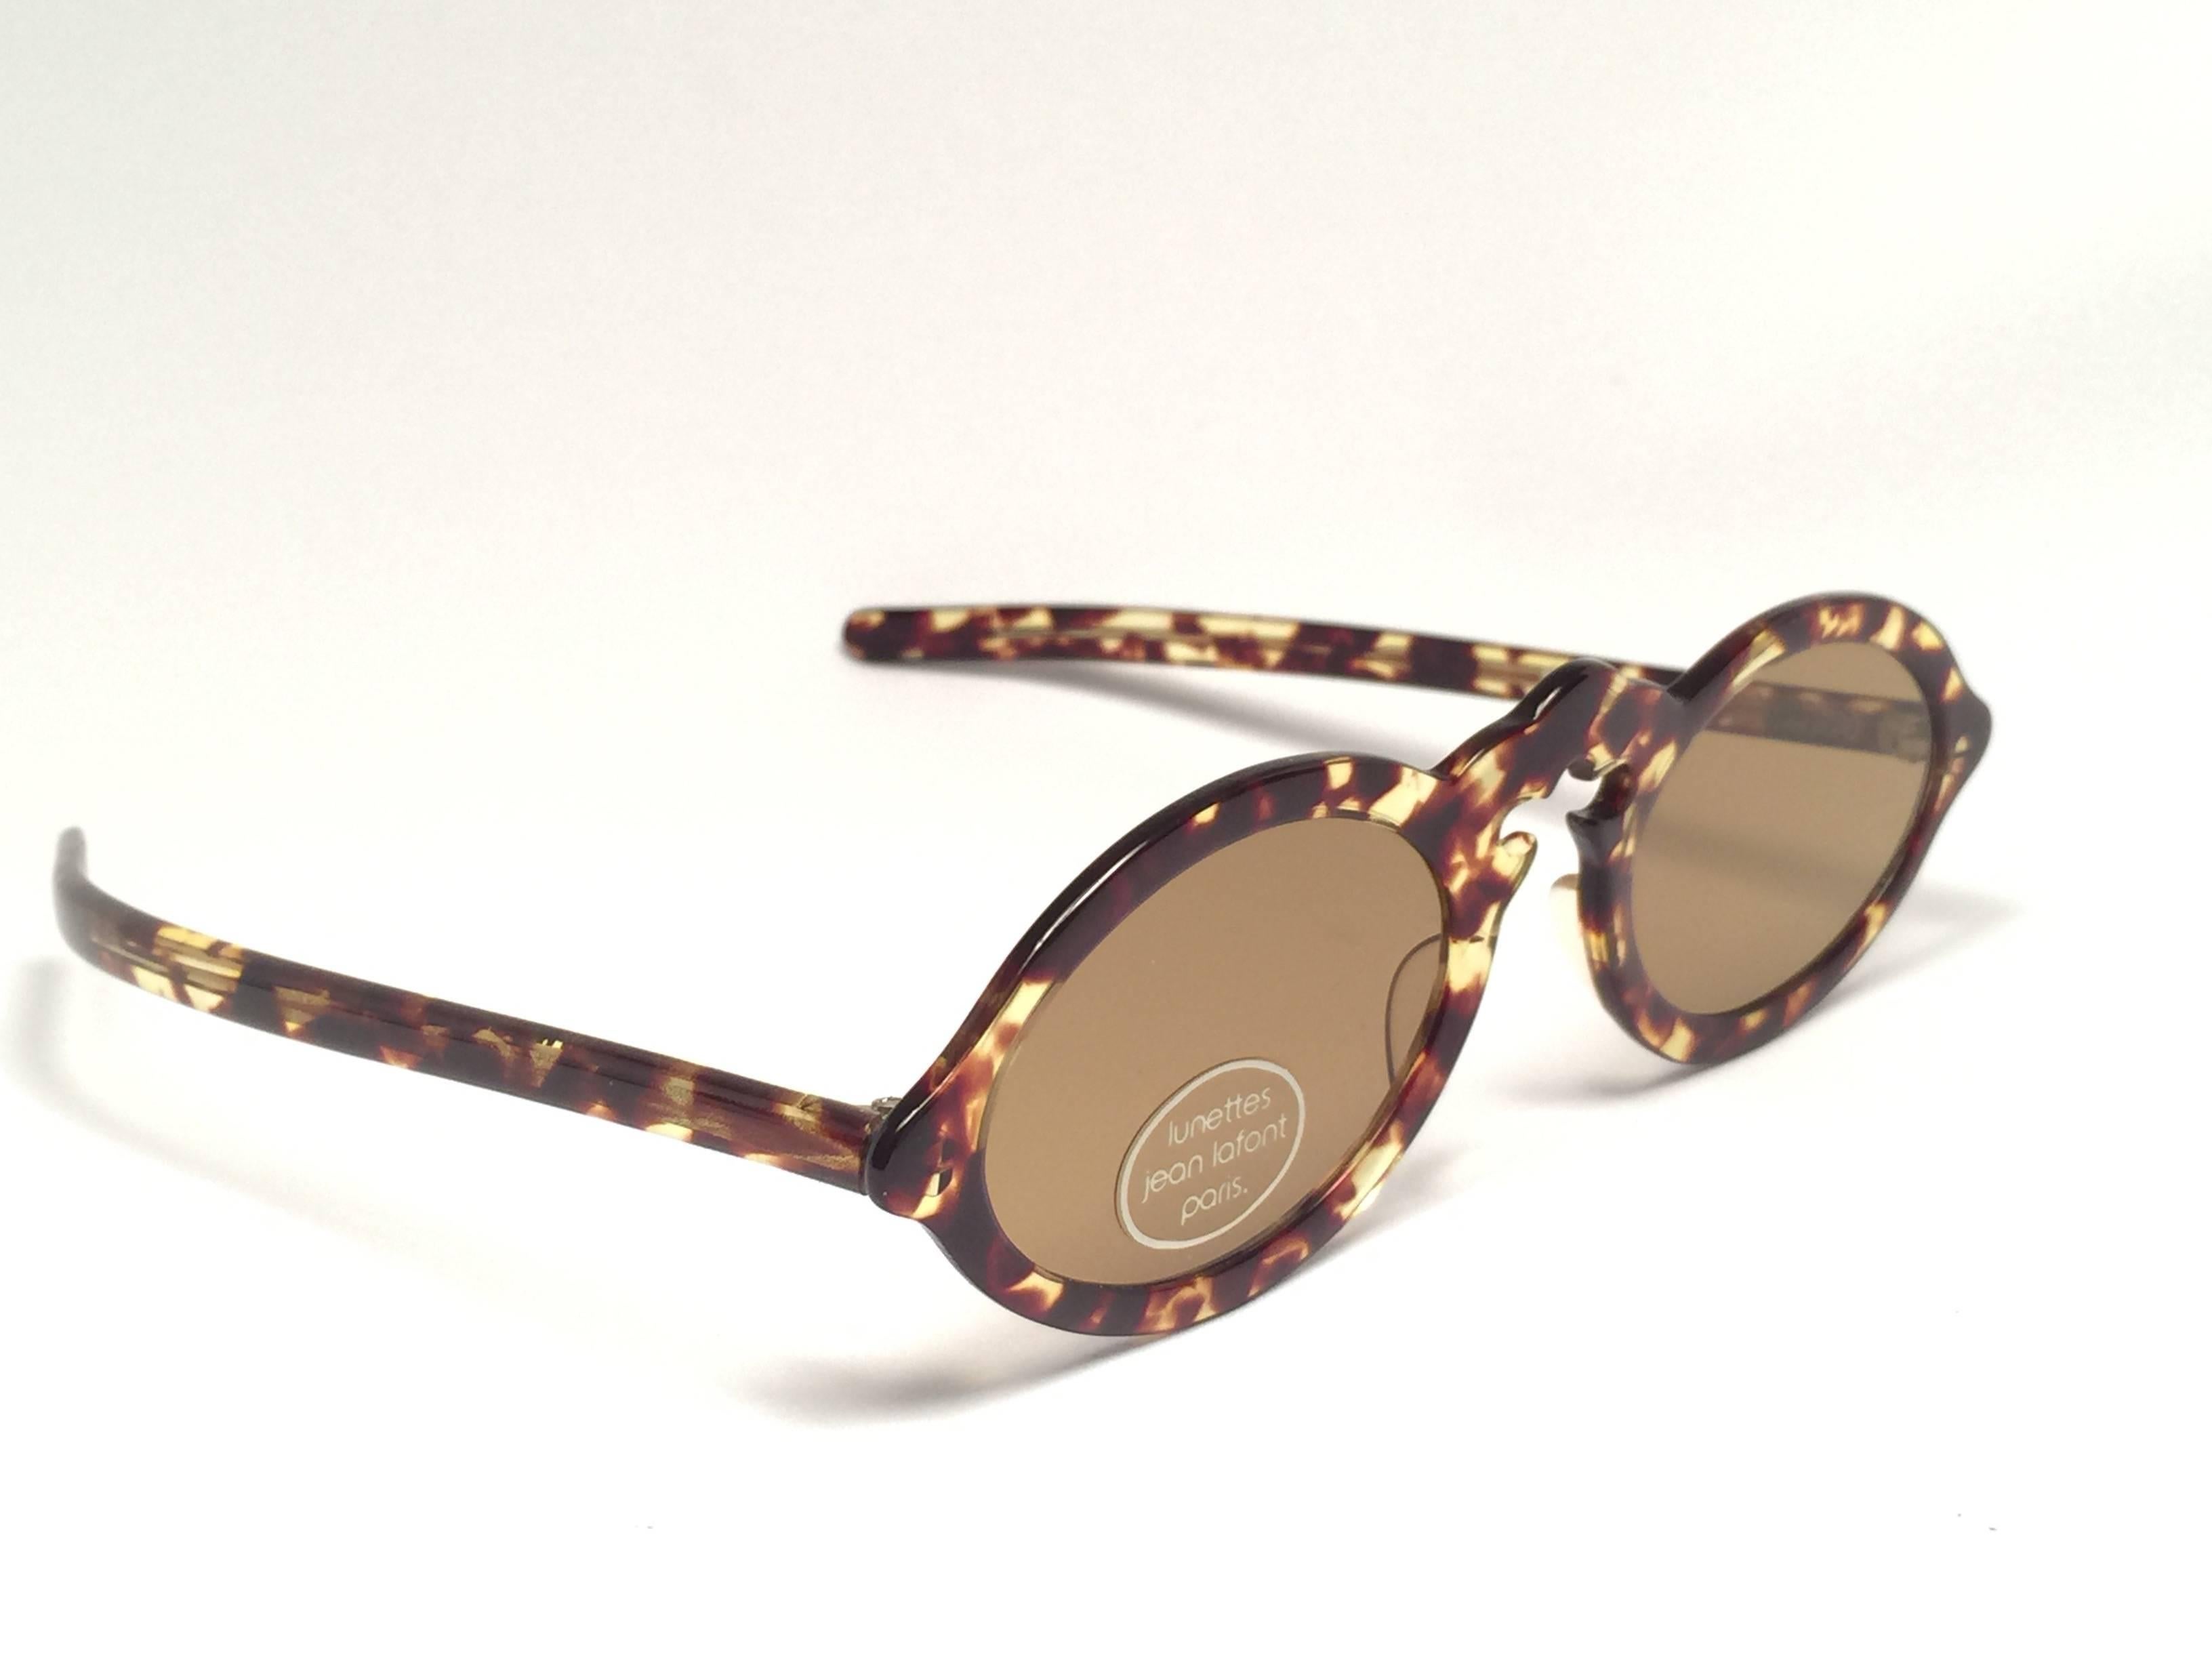 New Vintage Jean Lafont light tortoise cat eye frame. 
 
New never worn or displayed. 

This item could show minor sign of wear due to nearly 30 years of storage. Made in Italy.